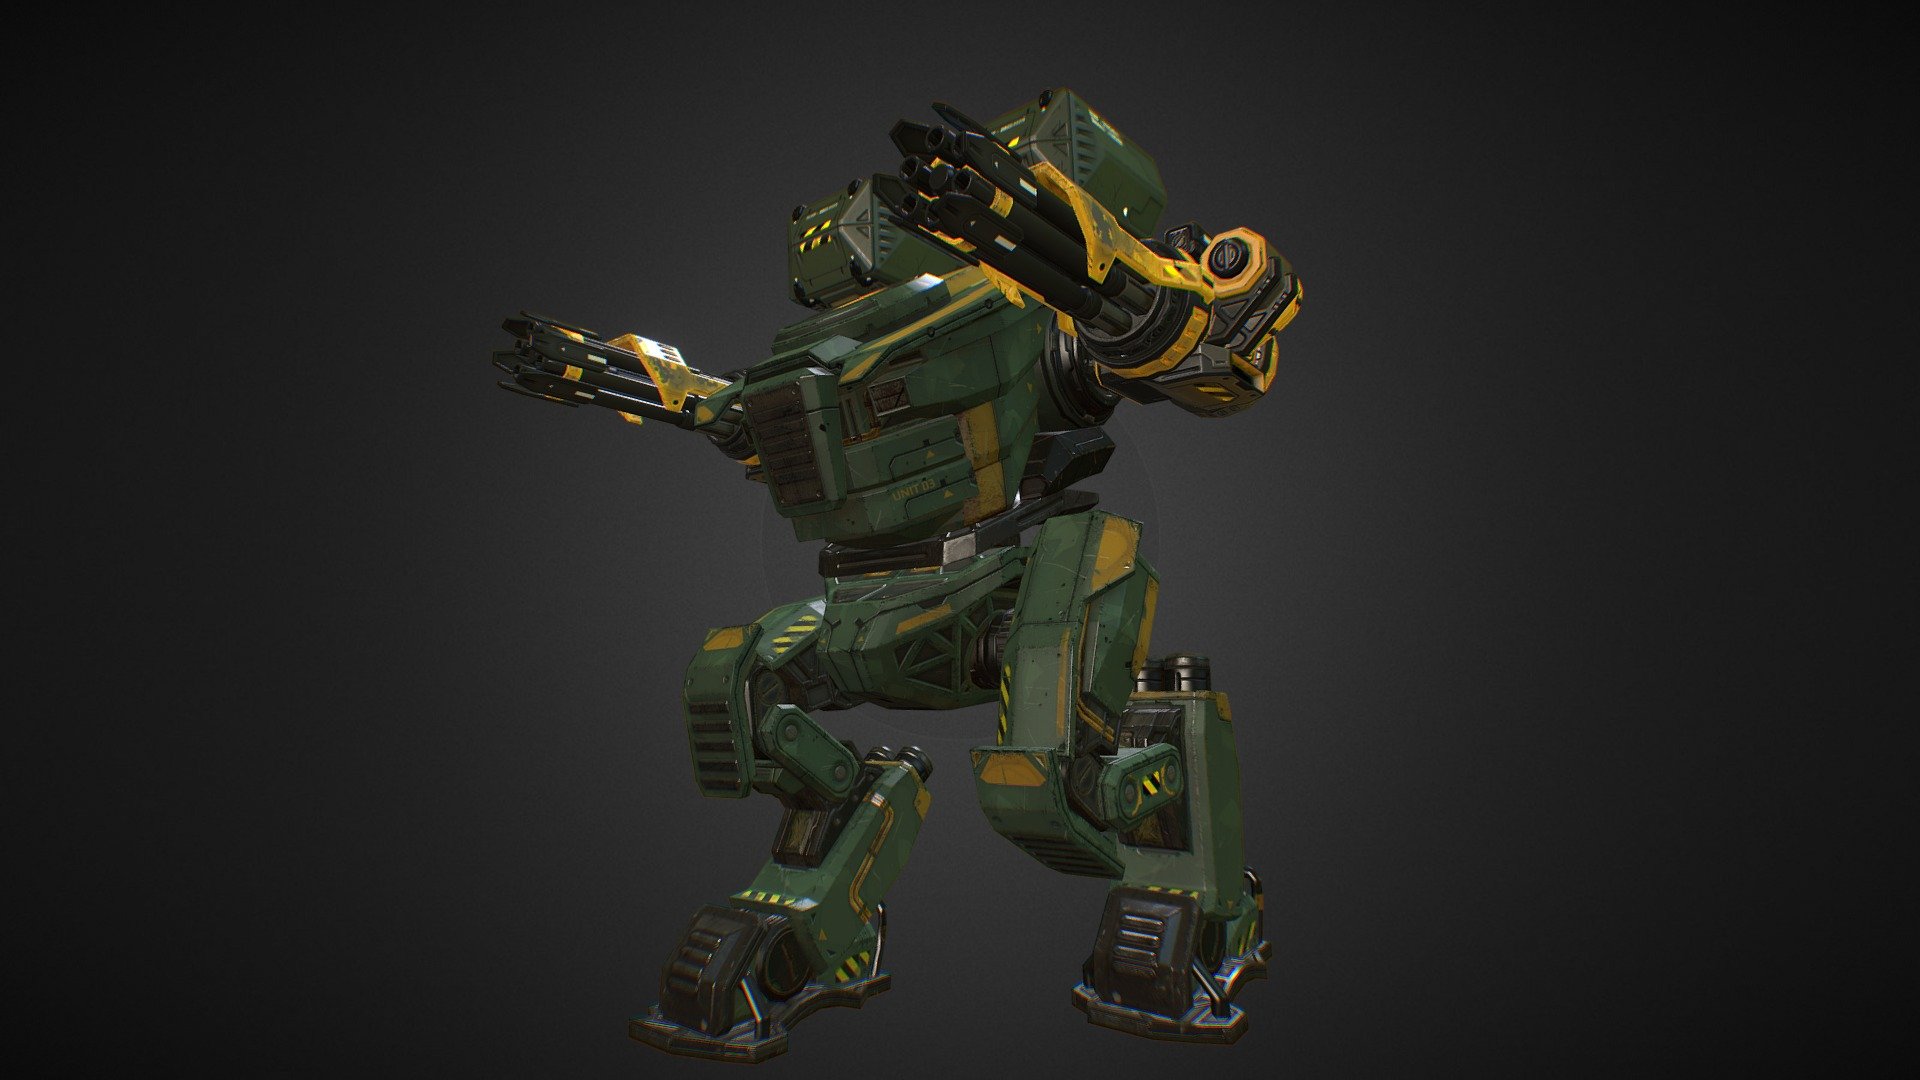 http://hellbender.weebly.com/ -link removed-#/content/26960 - Mech 1 - Mechs and Weapons Pack - 3D model by AlessandroLufrano 3d model